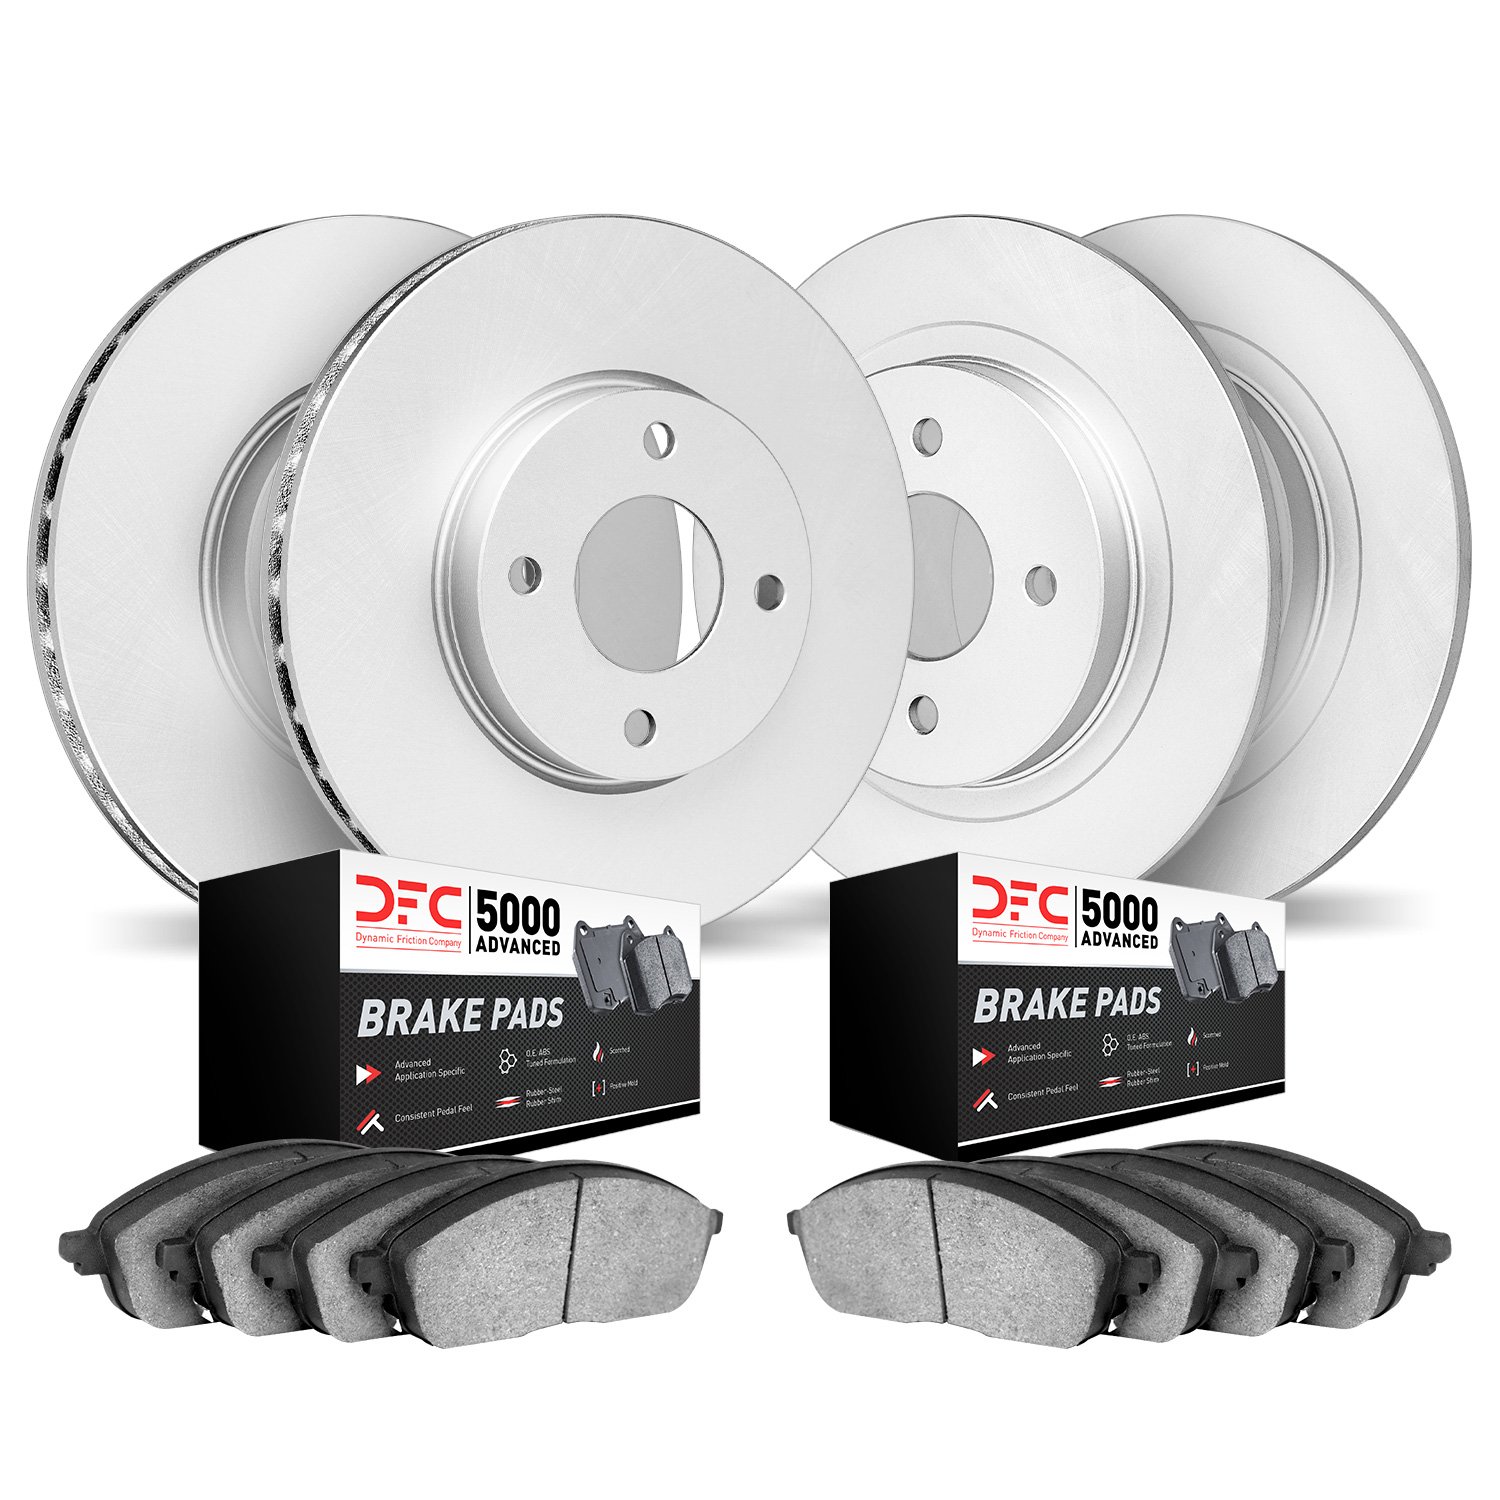 4504-54005 Geospec Brake Rotors w/5000 Advanced Brake Pads Kit, 1995-2003 Ford/Lincoln/Mercury/Mazda, Position: Front and Rear